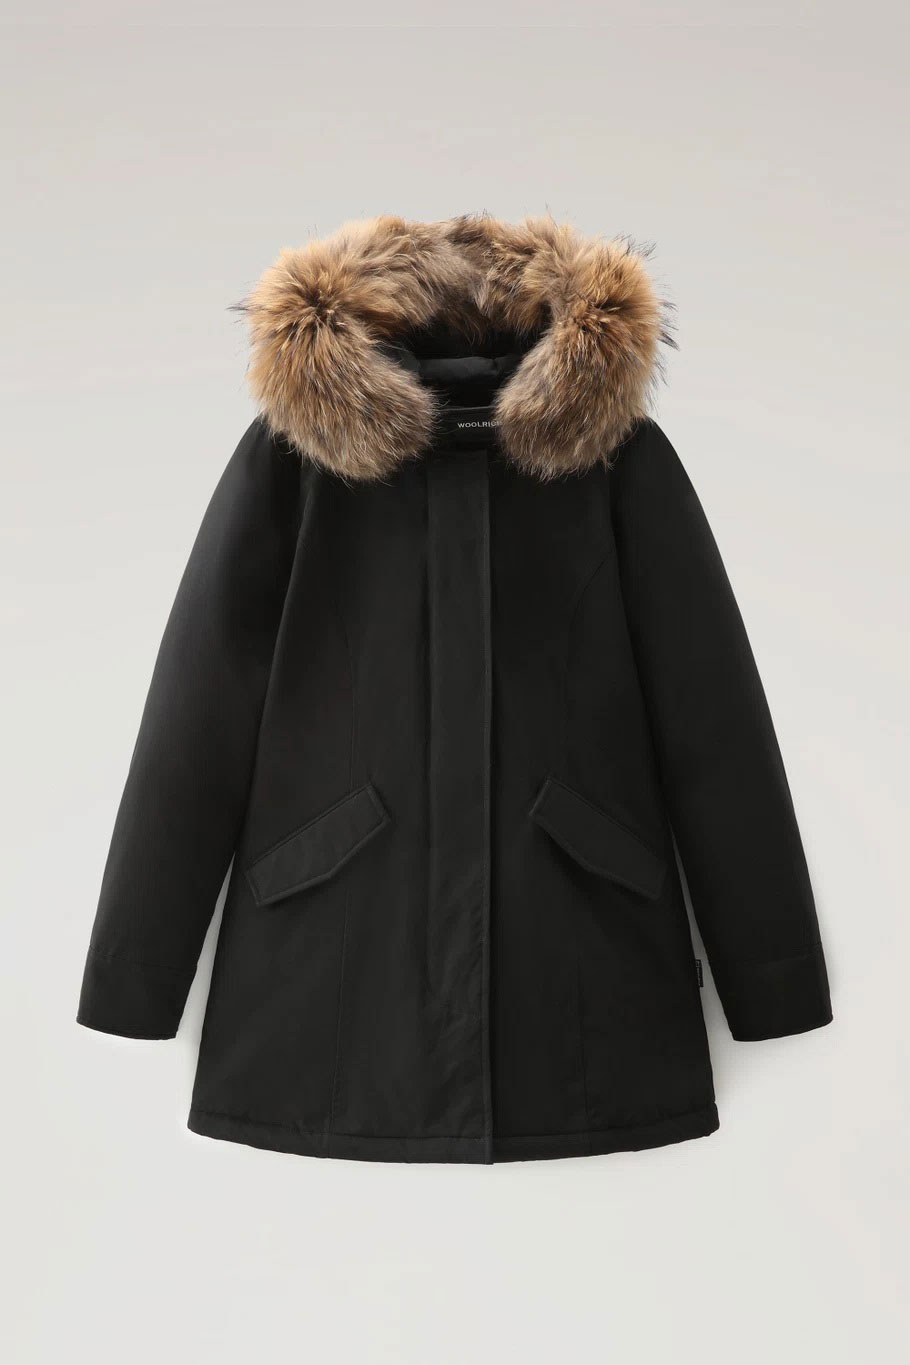 Giaccone Woolrich Artic Racoon Parka Nero